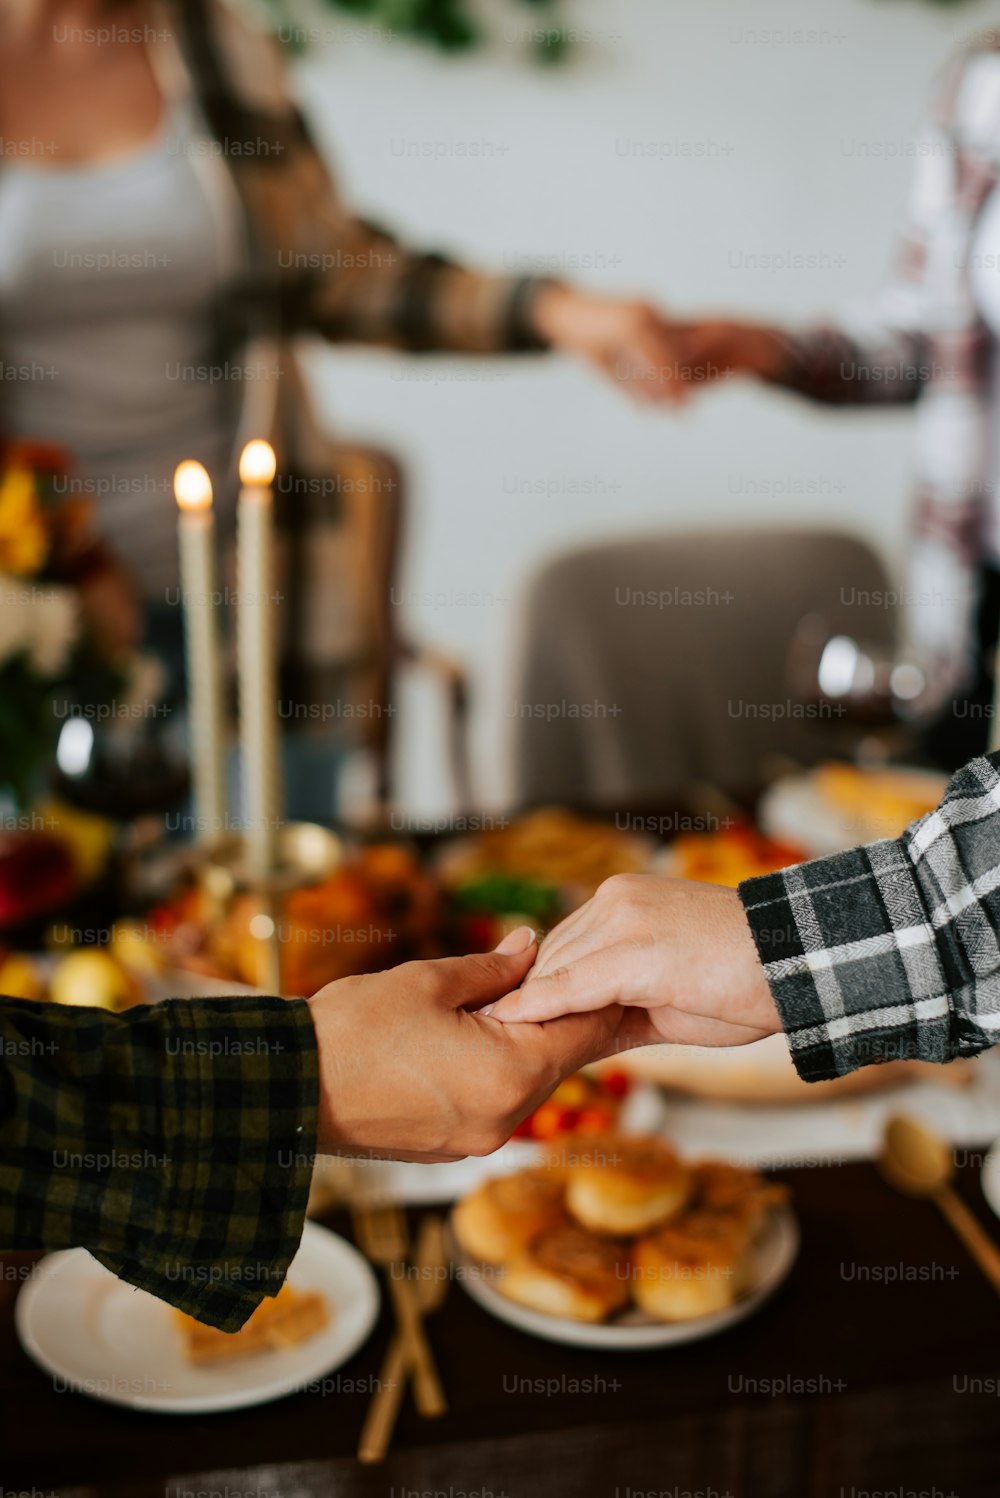 two people holding hands over a plate of food